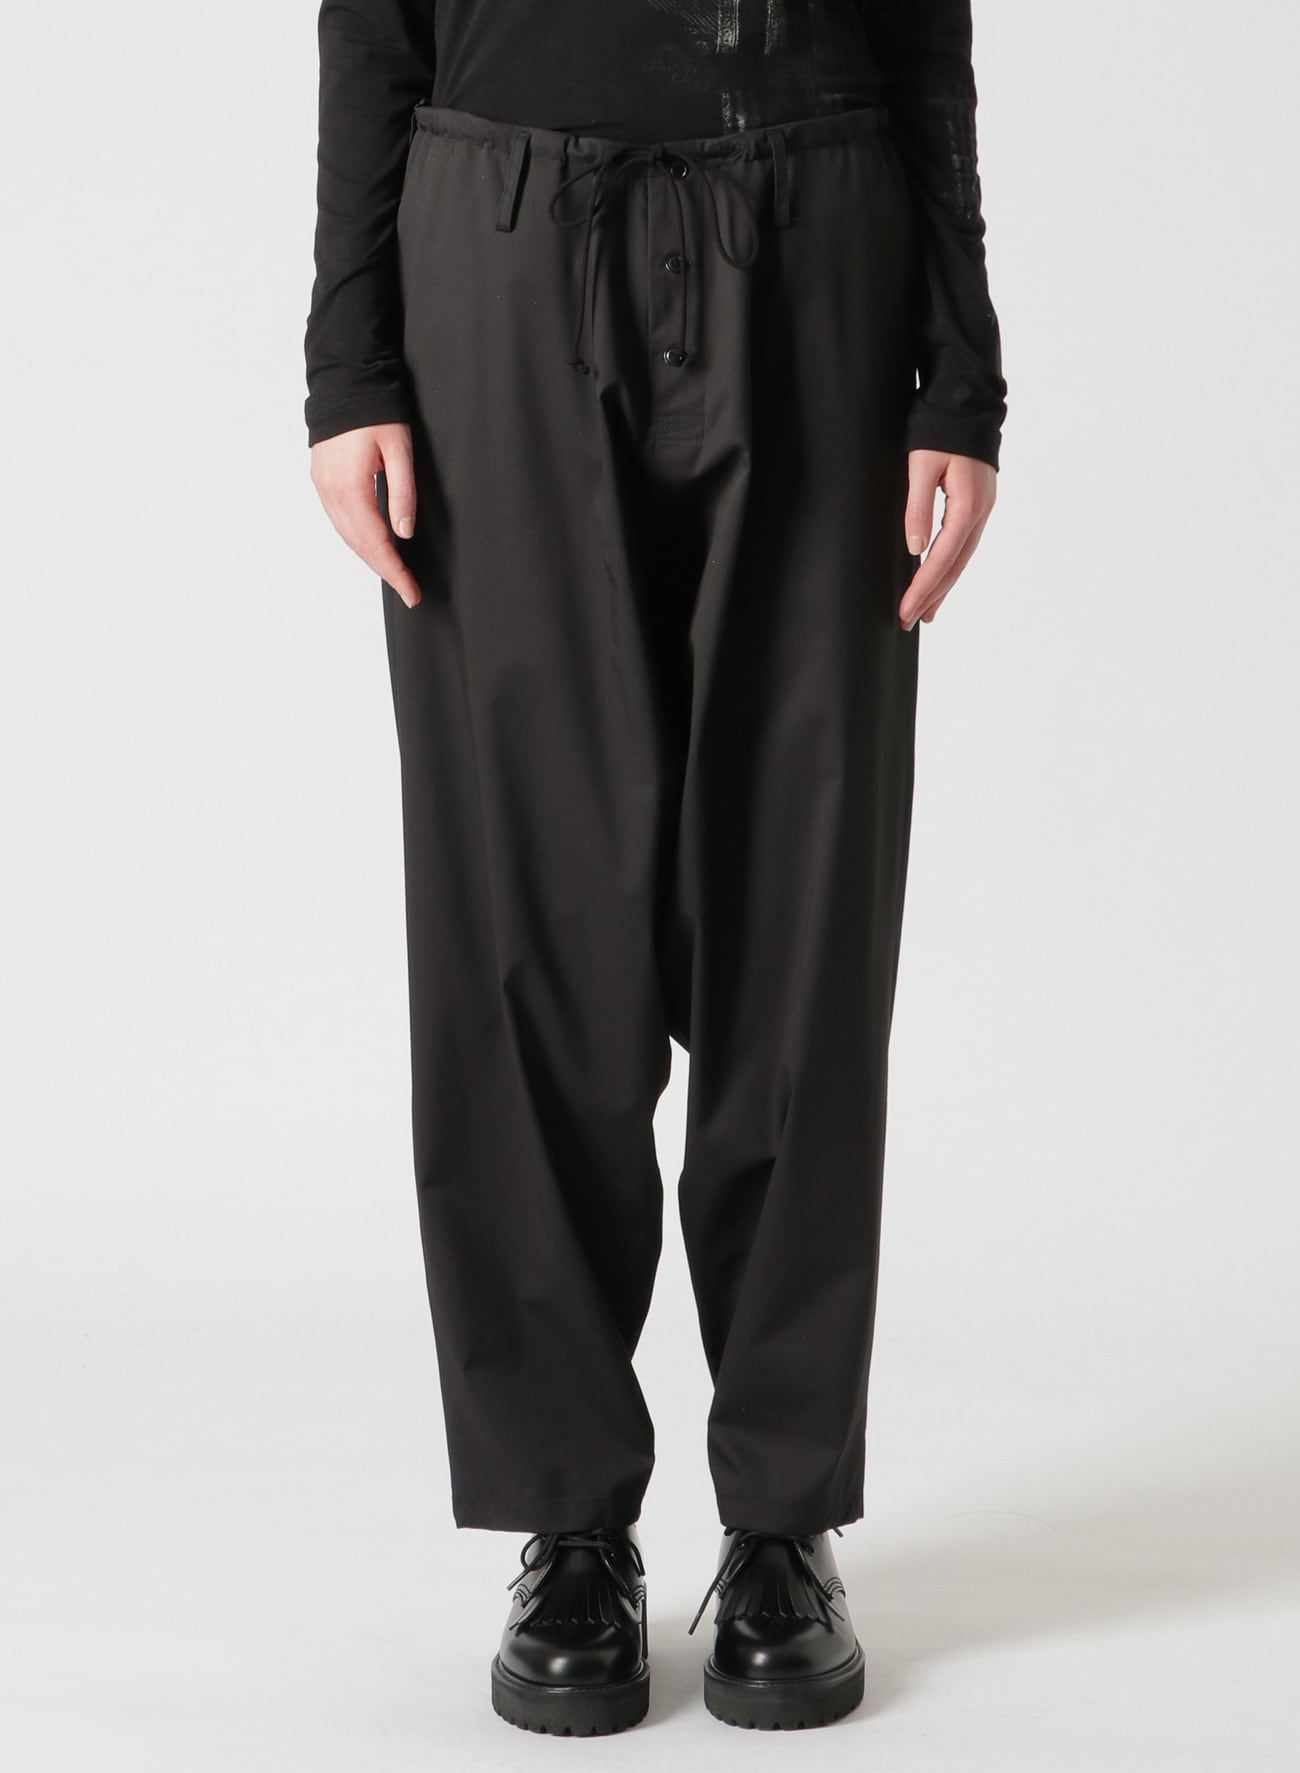 STRETCHY POLYESTER/RAYON TWILL DRAWSTRING PANTS(S Black): Y's｜THE